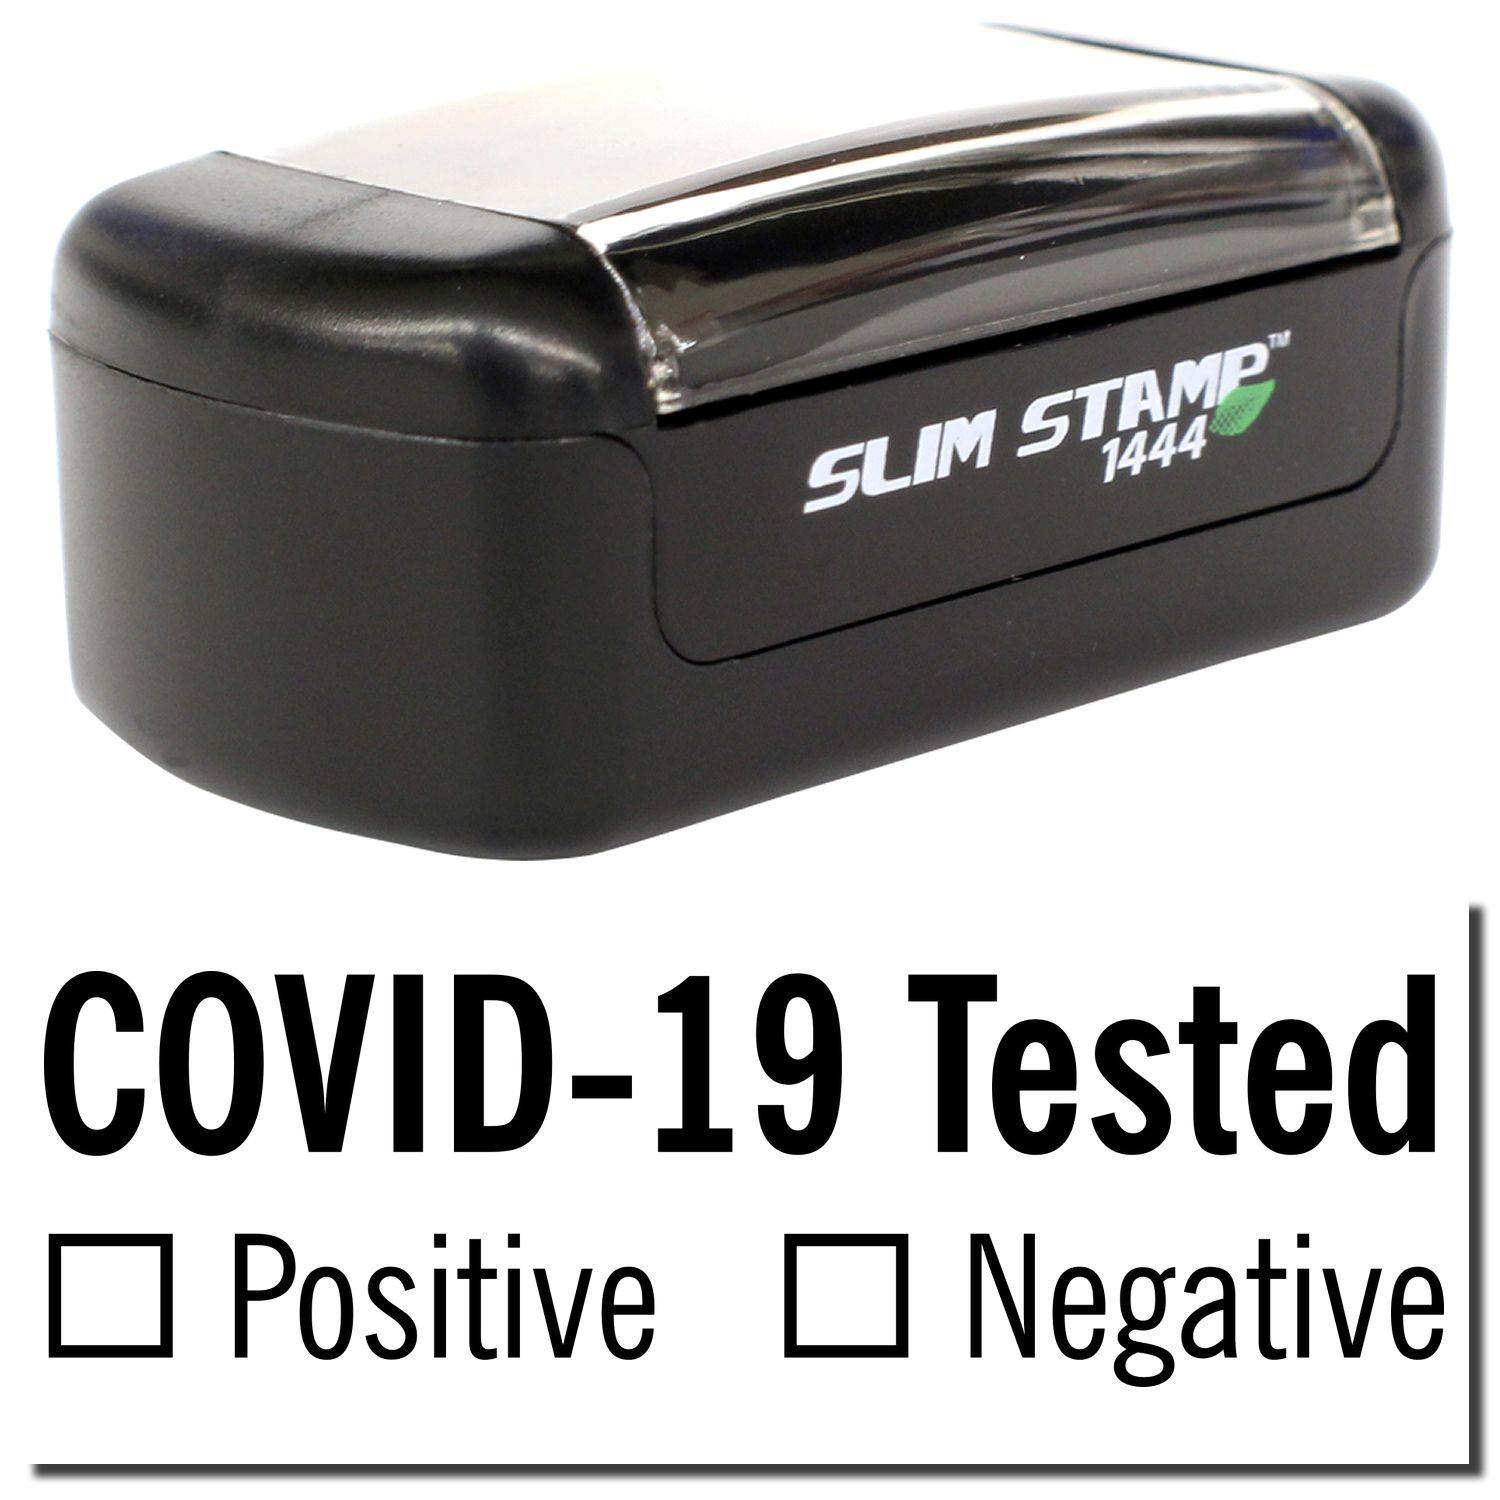 A stock office pre-inked stamp with a stamped image showing how the text "COVID-19 Tested" with a space underneath to check a box based on whether a person is positive or negative for the virus is displayed after stamping.